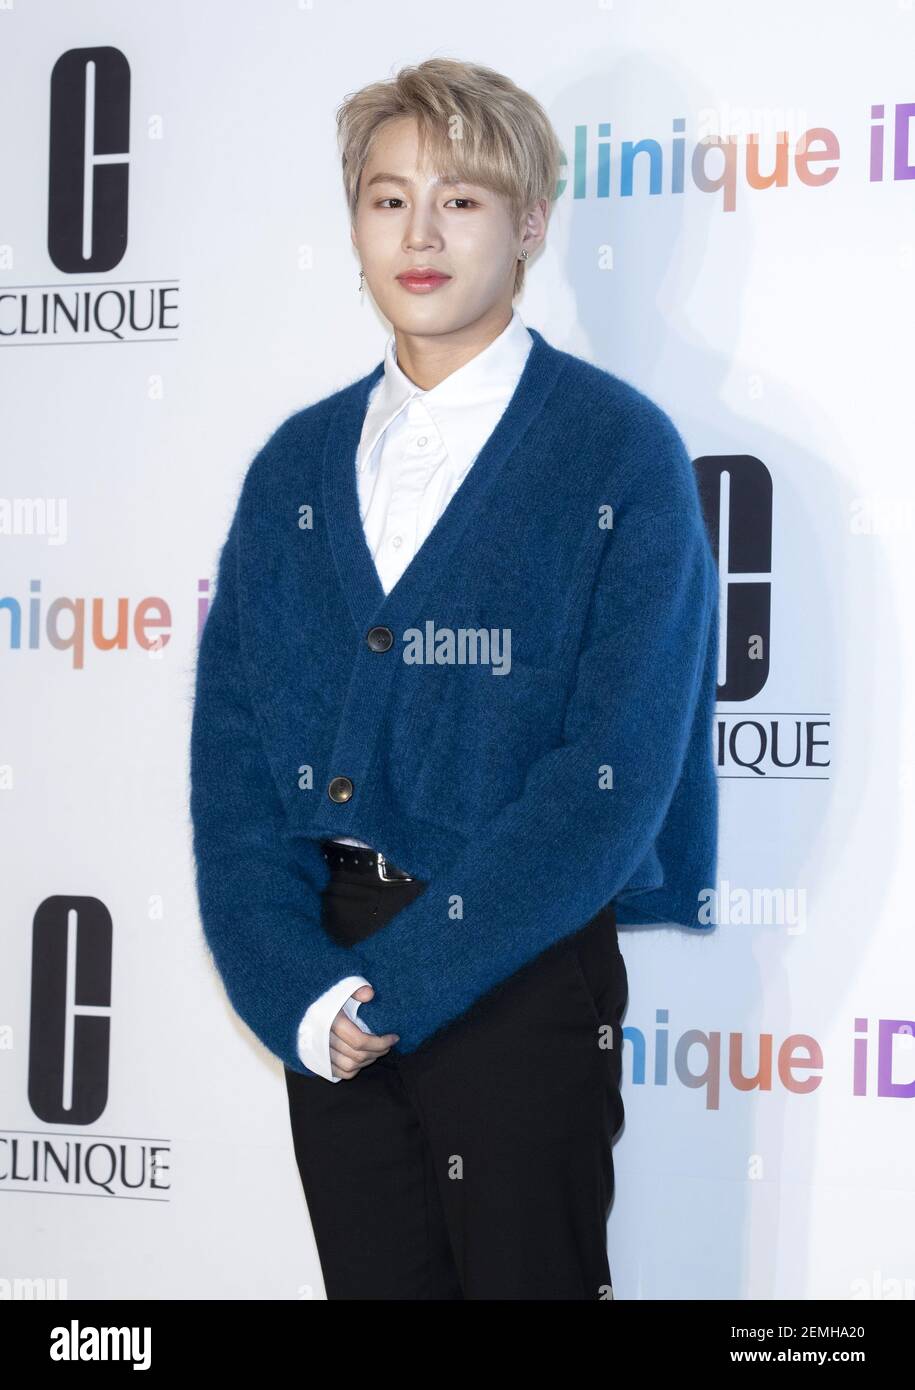 26 February 2019 - Seoul, South Korea : South Korean singer Ha Sung-woon,  former member of boys band Wanna One, attends photo call for the skin care  and makeup brand Clinique id